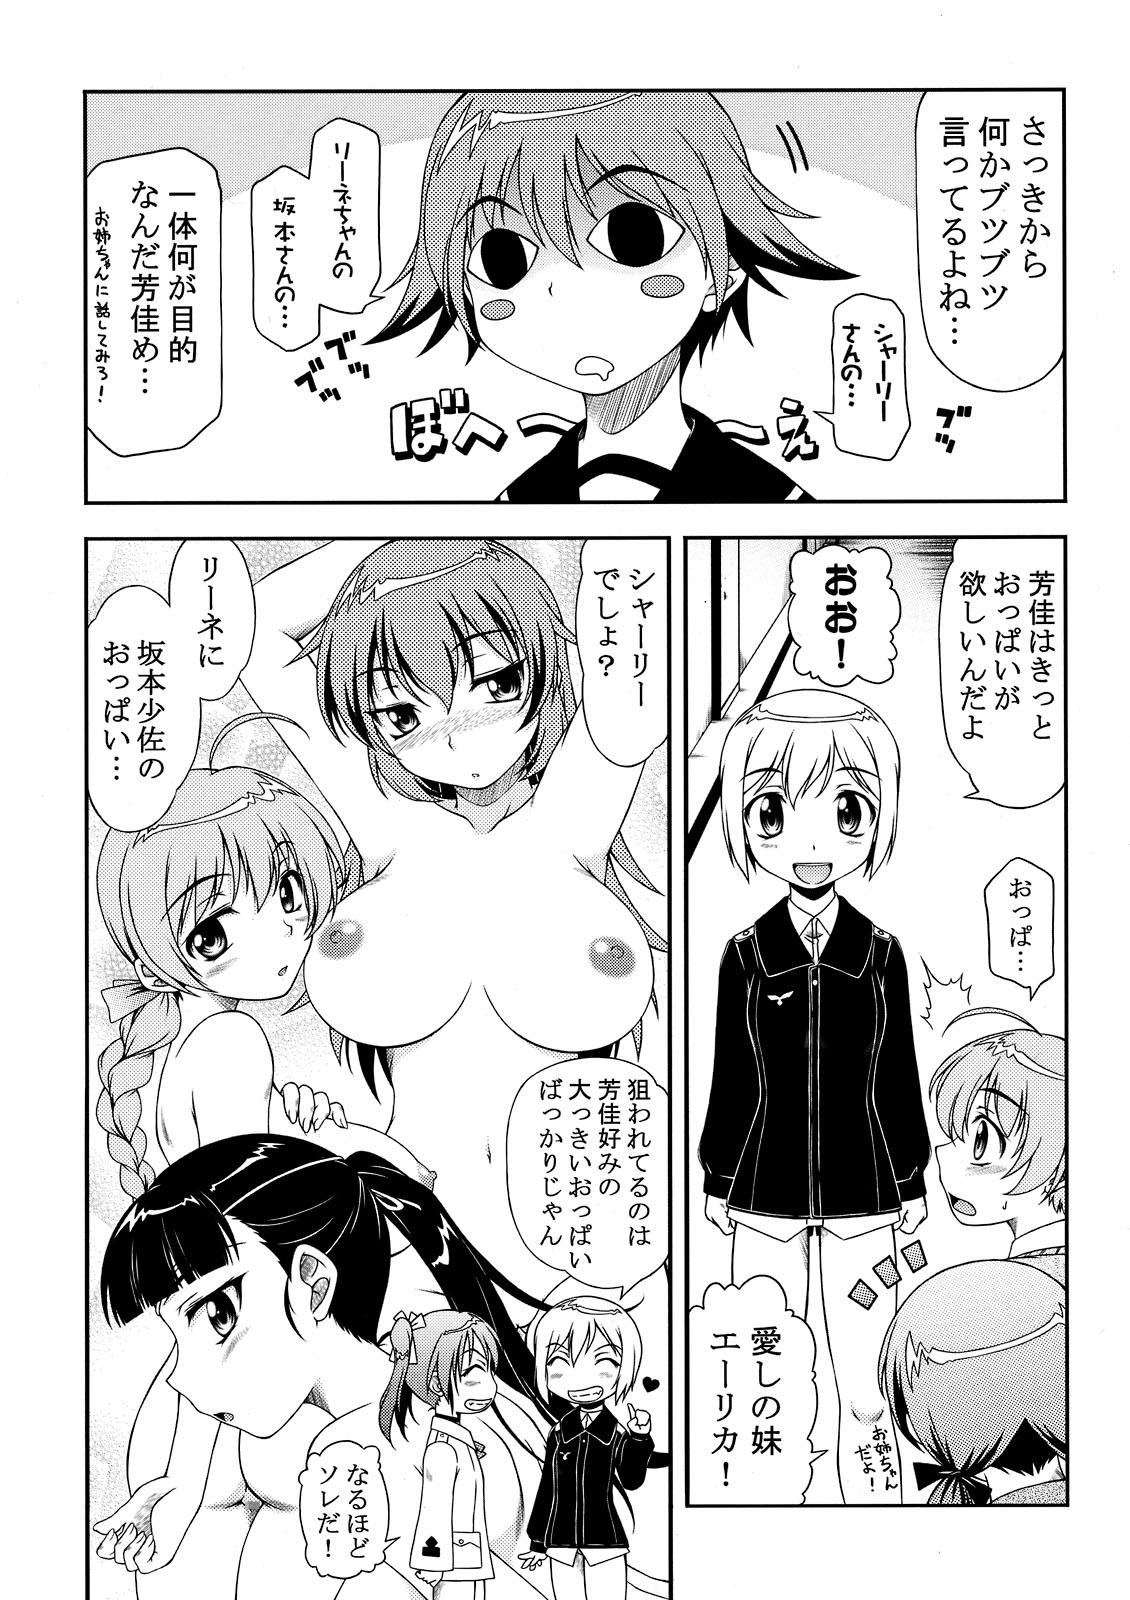 Sex Hokyuubusshi 501 - Strike witches Blow Job Porn - Page 8